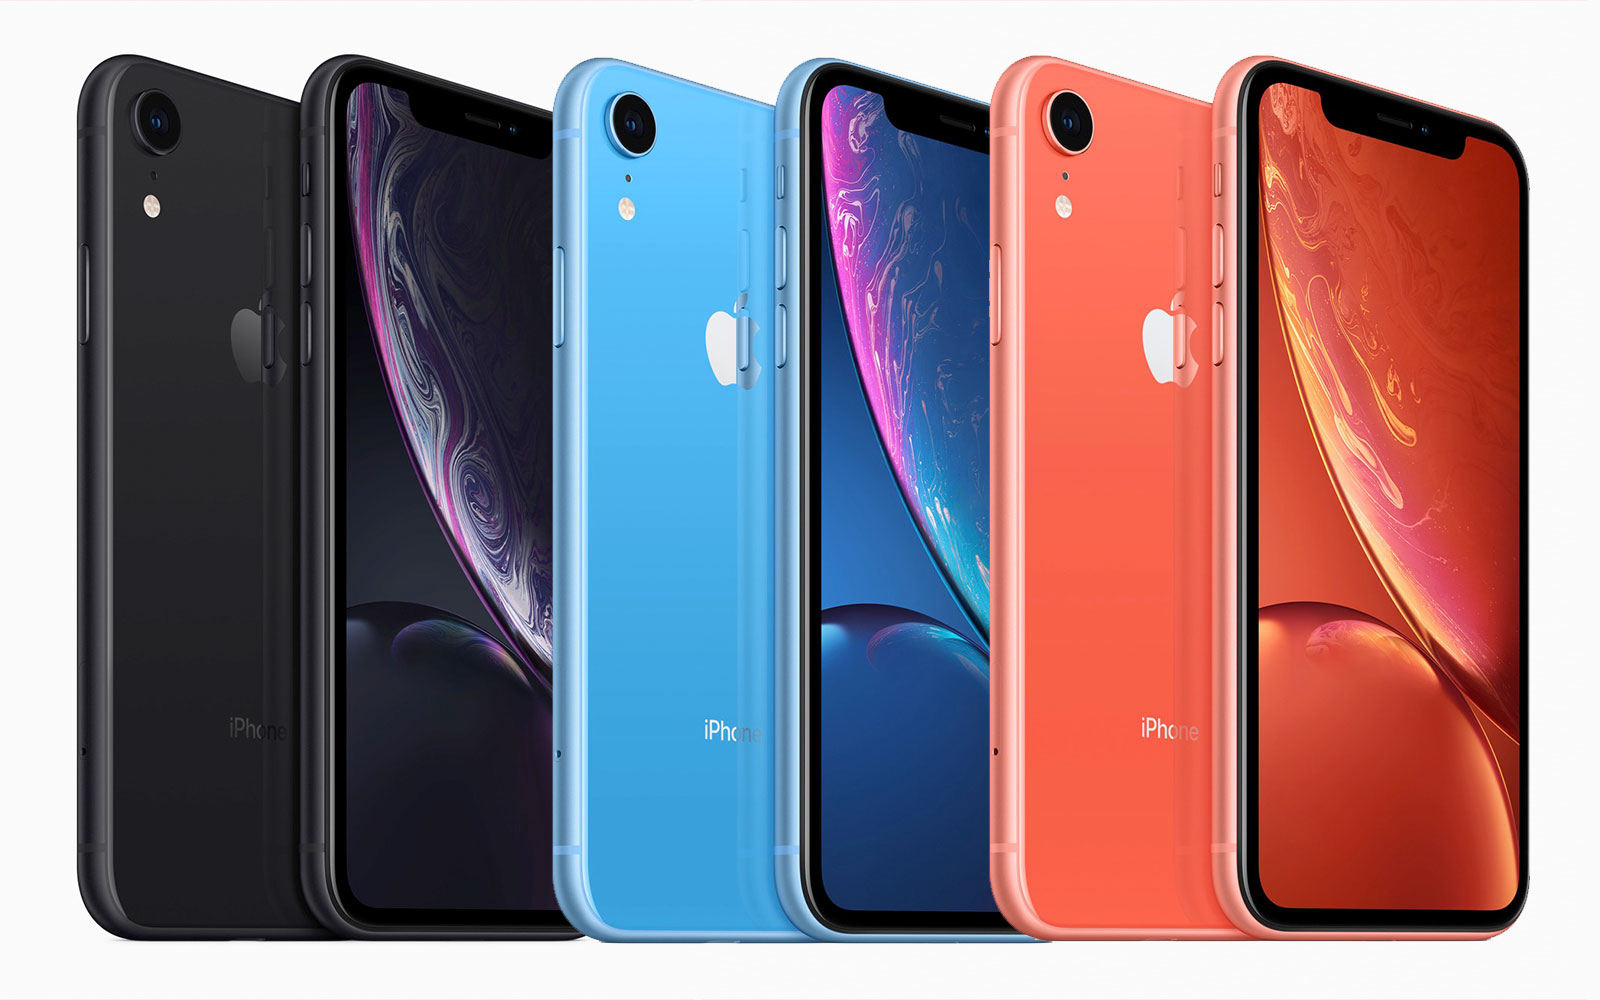 Apple's iPhone Xr is an 'affordable' iPhone X1600 x 1000